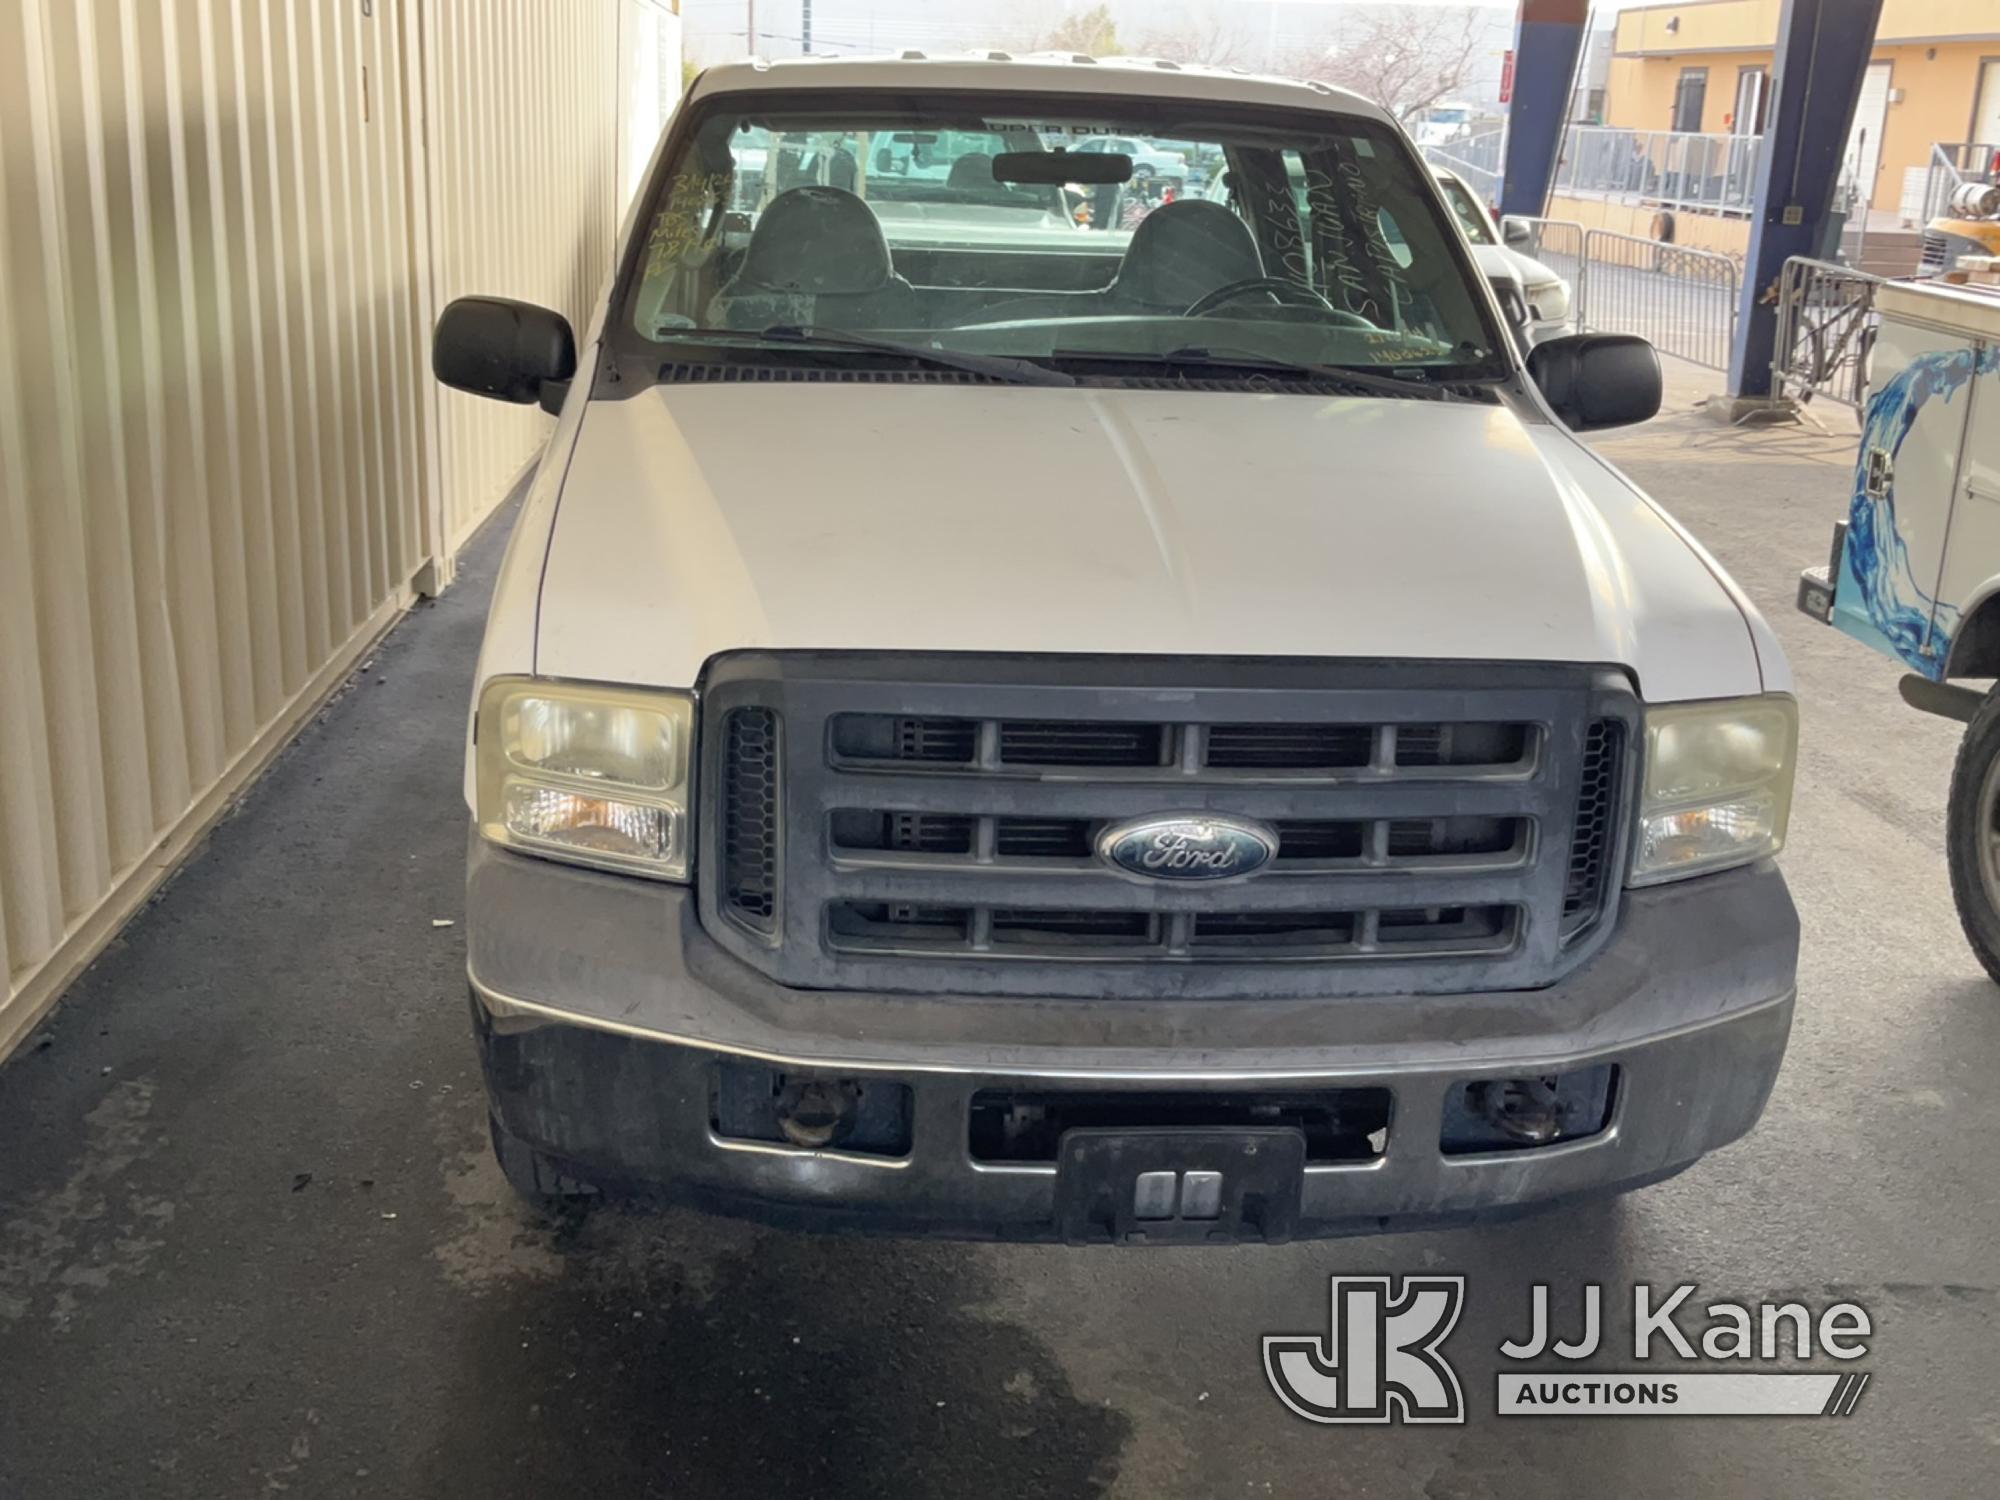 (Jurupa Valley, CA) 2006 Ford F250 Crew-Cab Pickup Truck, 03/27/24 received email from brightview st